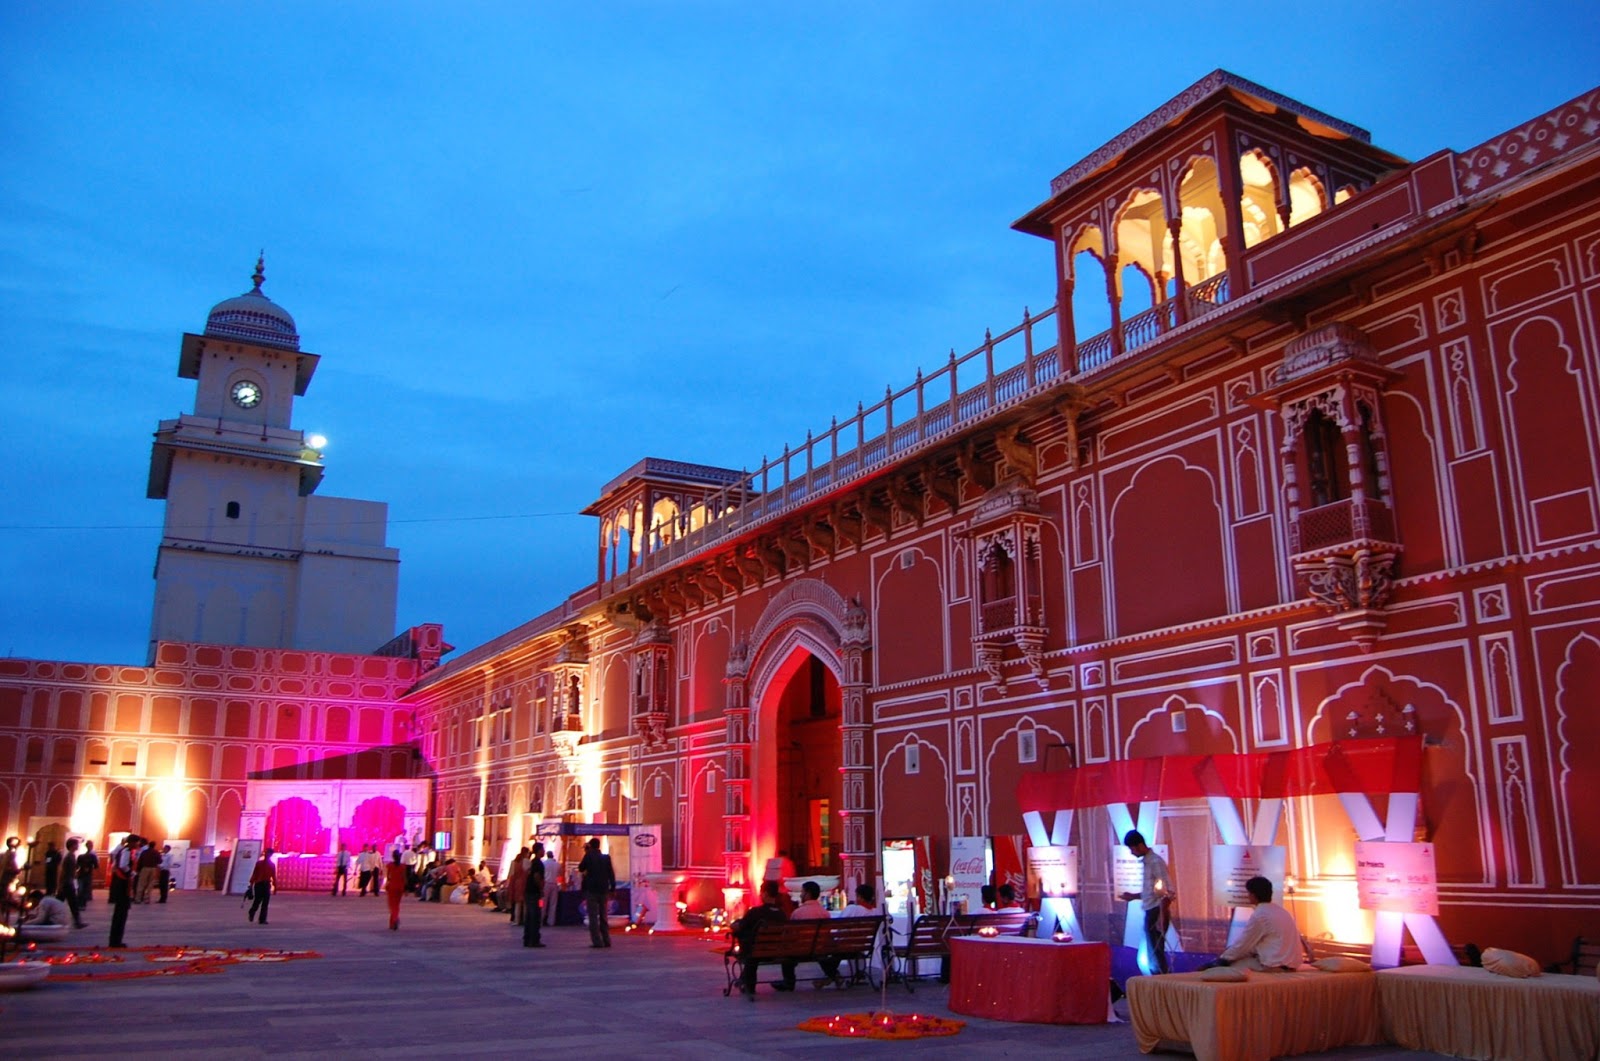 Jaipur: Tourist Places in India | Insight India : A Travel Guide to India